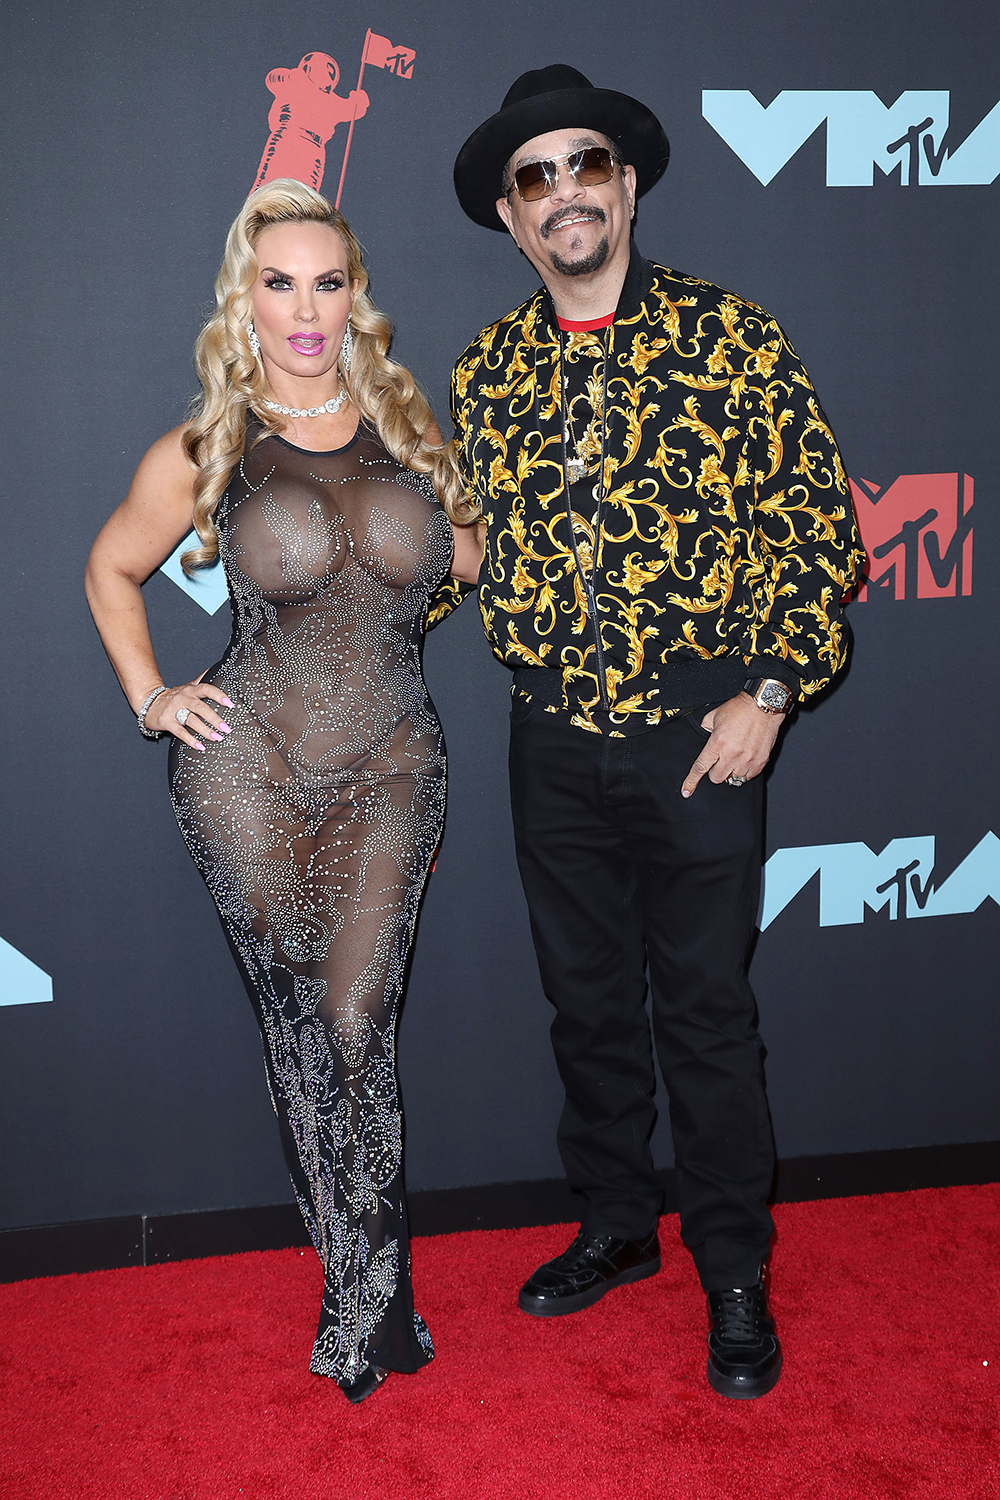 Ice-T and Coco Austin Photos Of The Famous Couple image